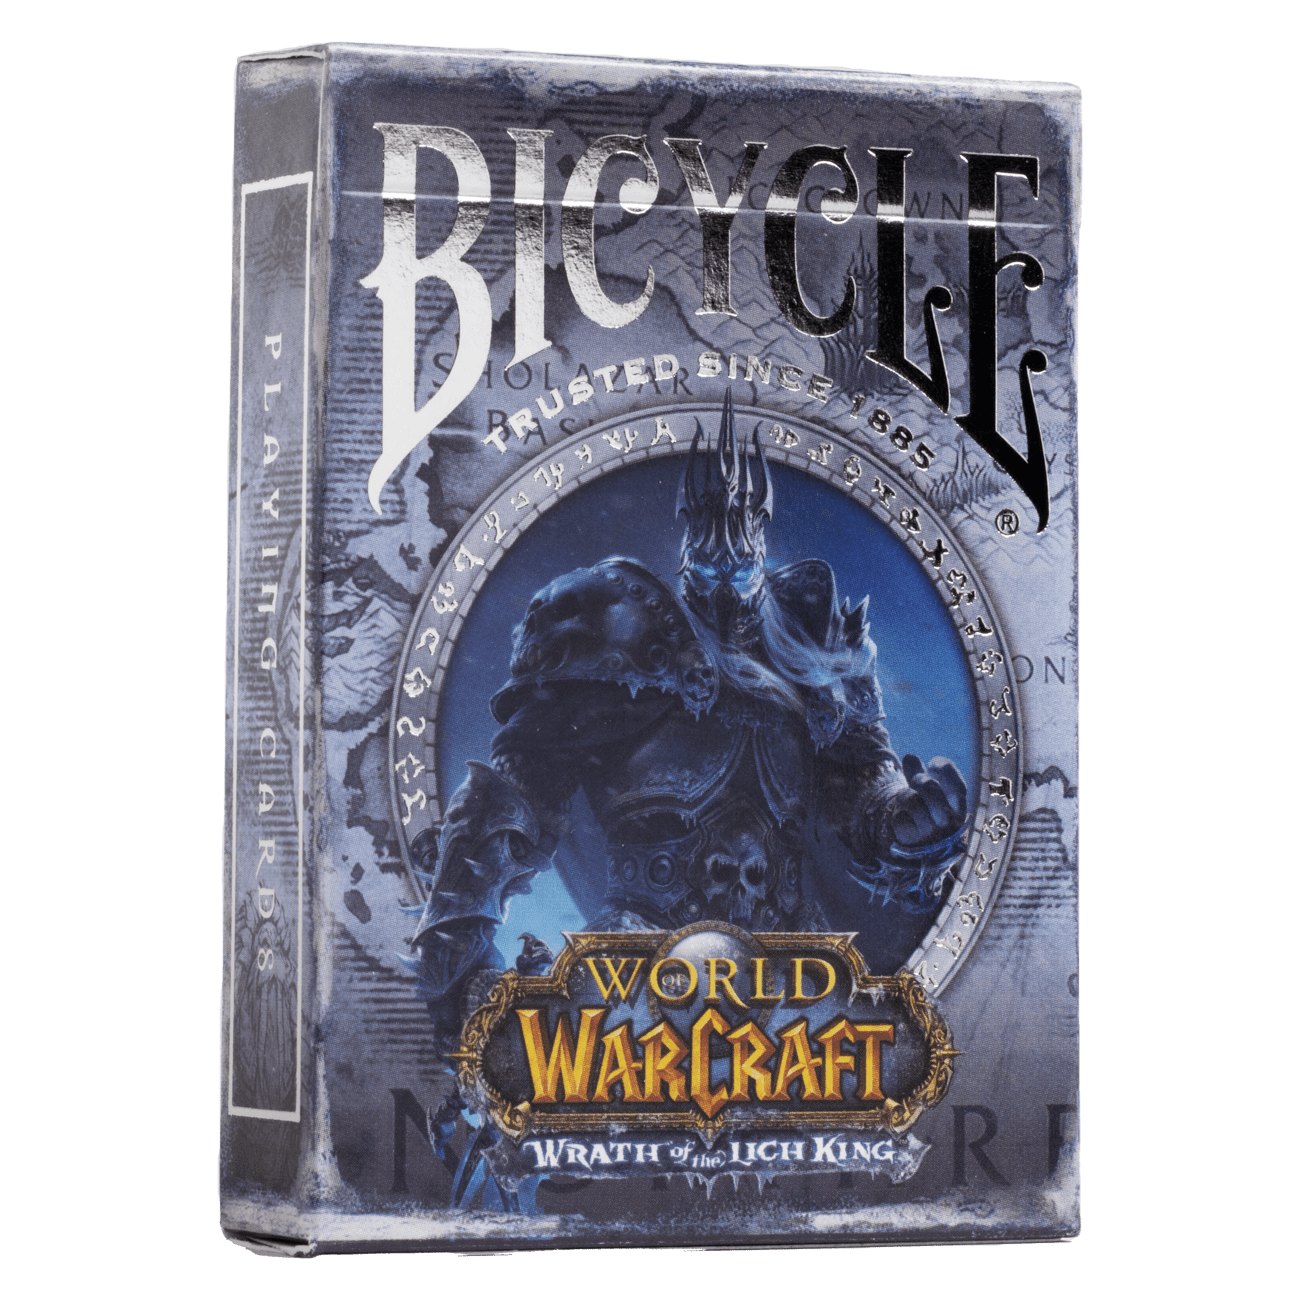 Bicycle: World of Warcraft - Wrath of the Lich King